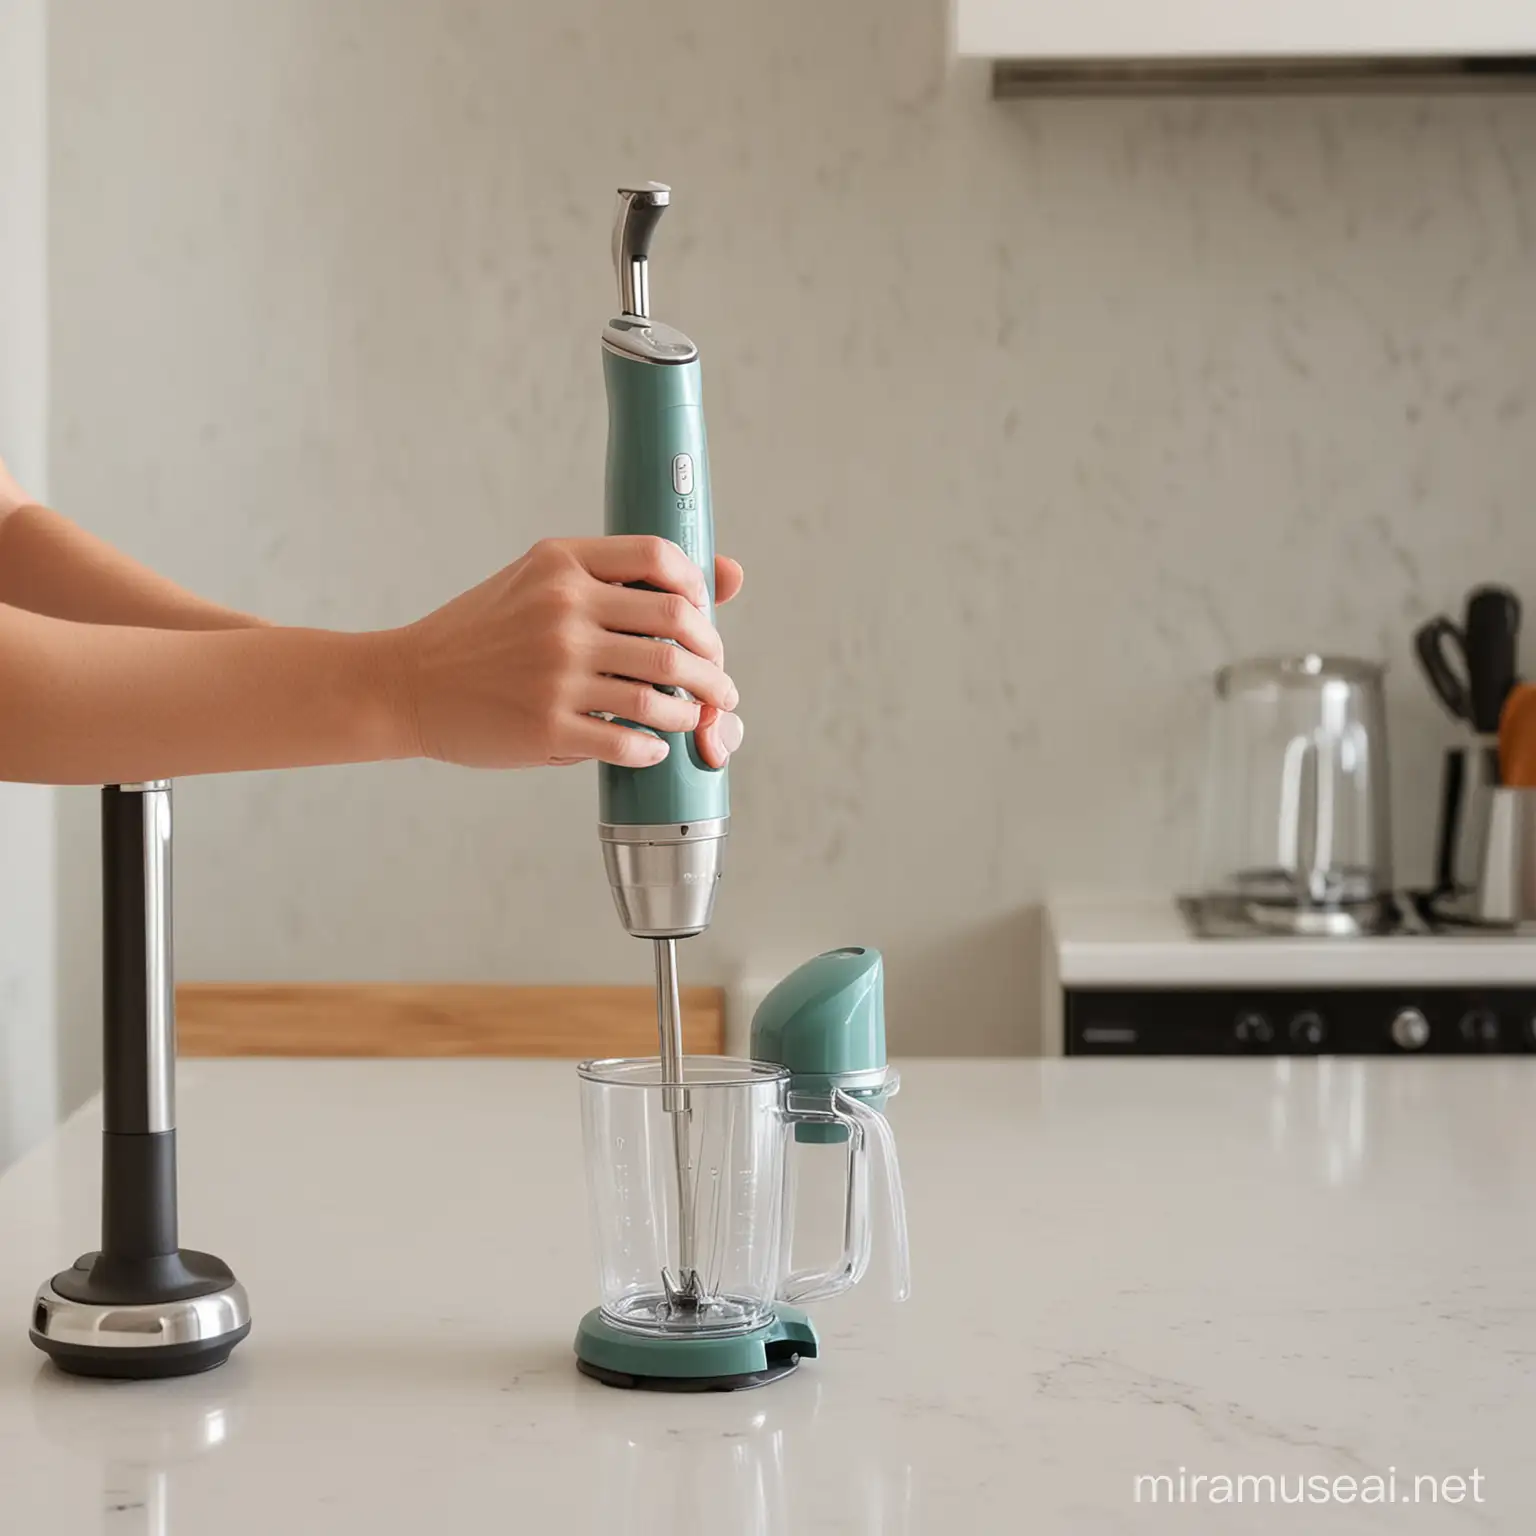 a women hand hold a stick blender on the counter,and then detach the upper and buttom part by snap on design

